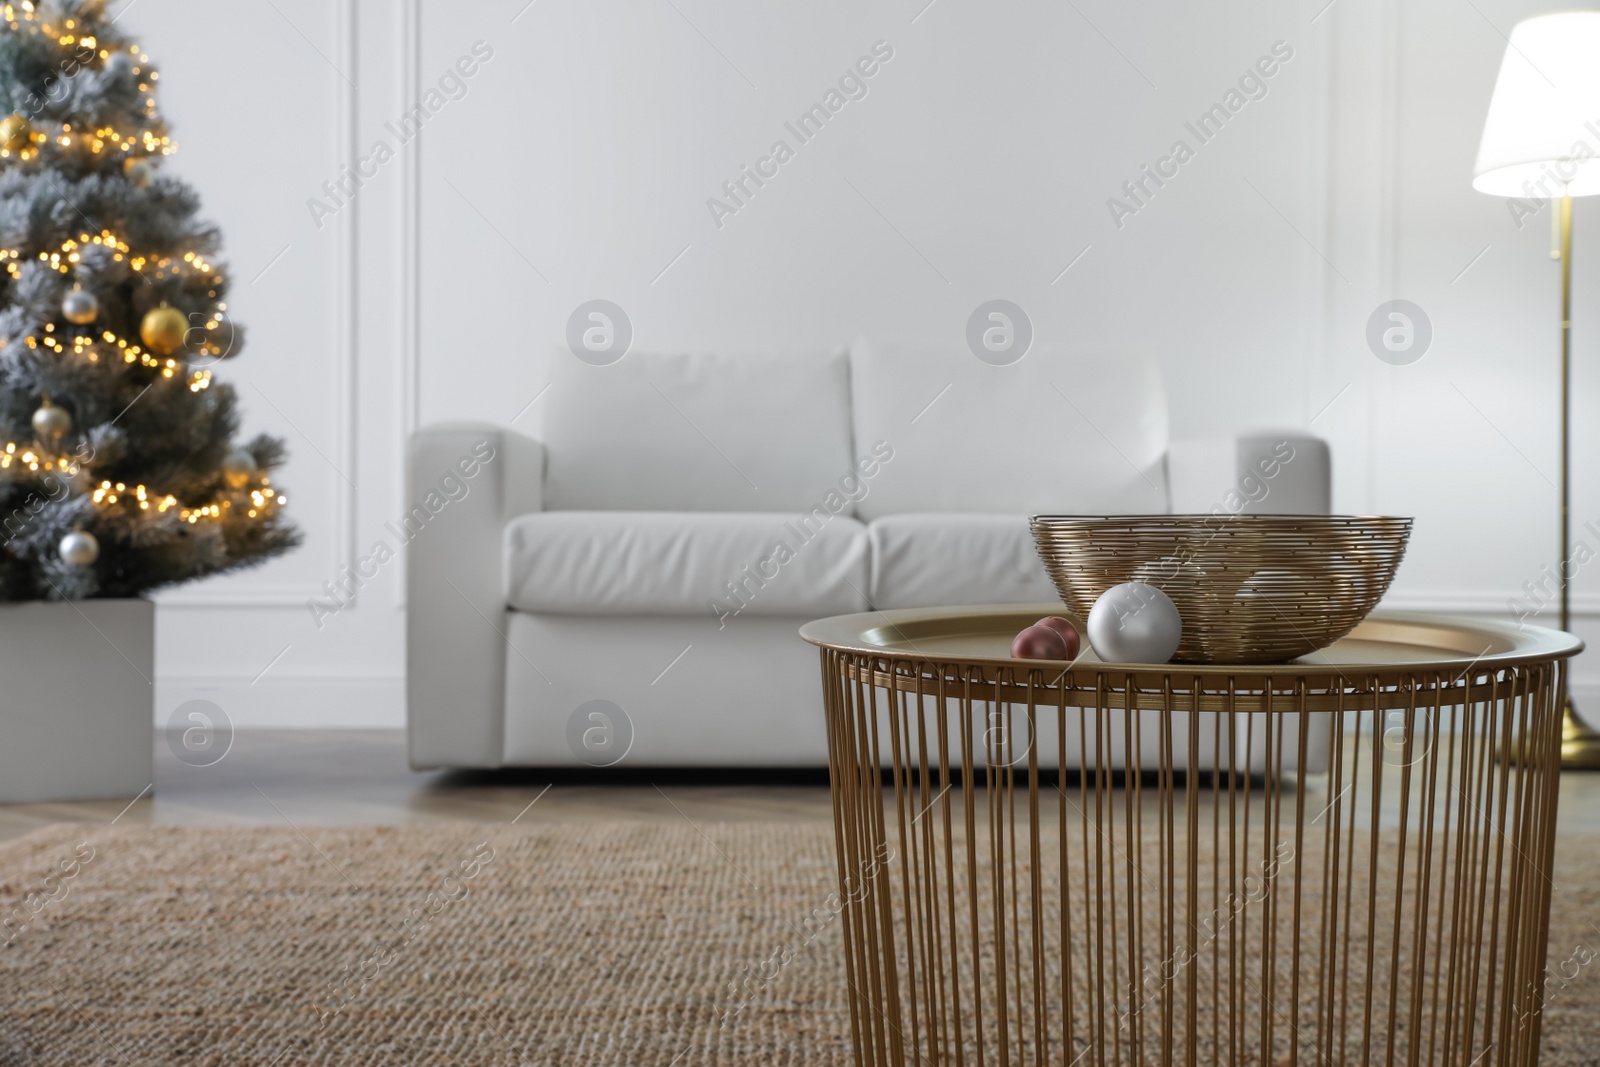 Photo of Christmas ornaments and bowl on table in living room. Interior design